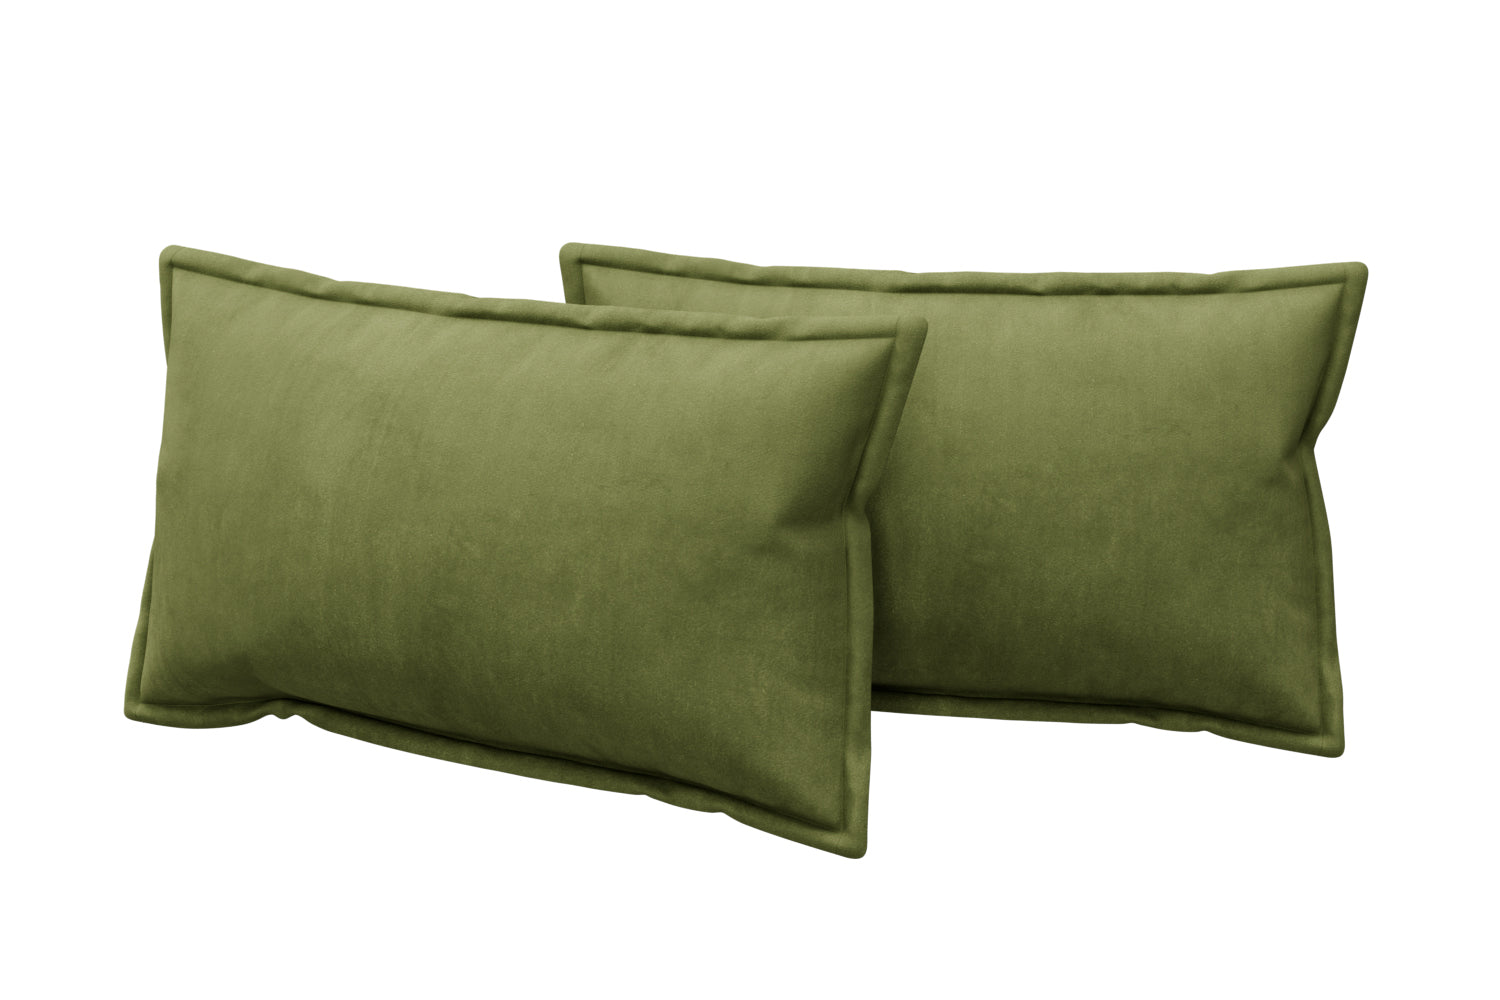 Accessories - Pair of Edged Bolster Cushions - Olive